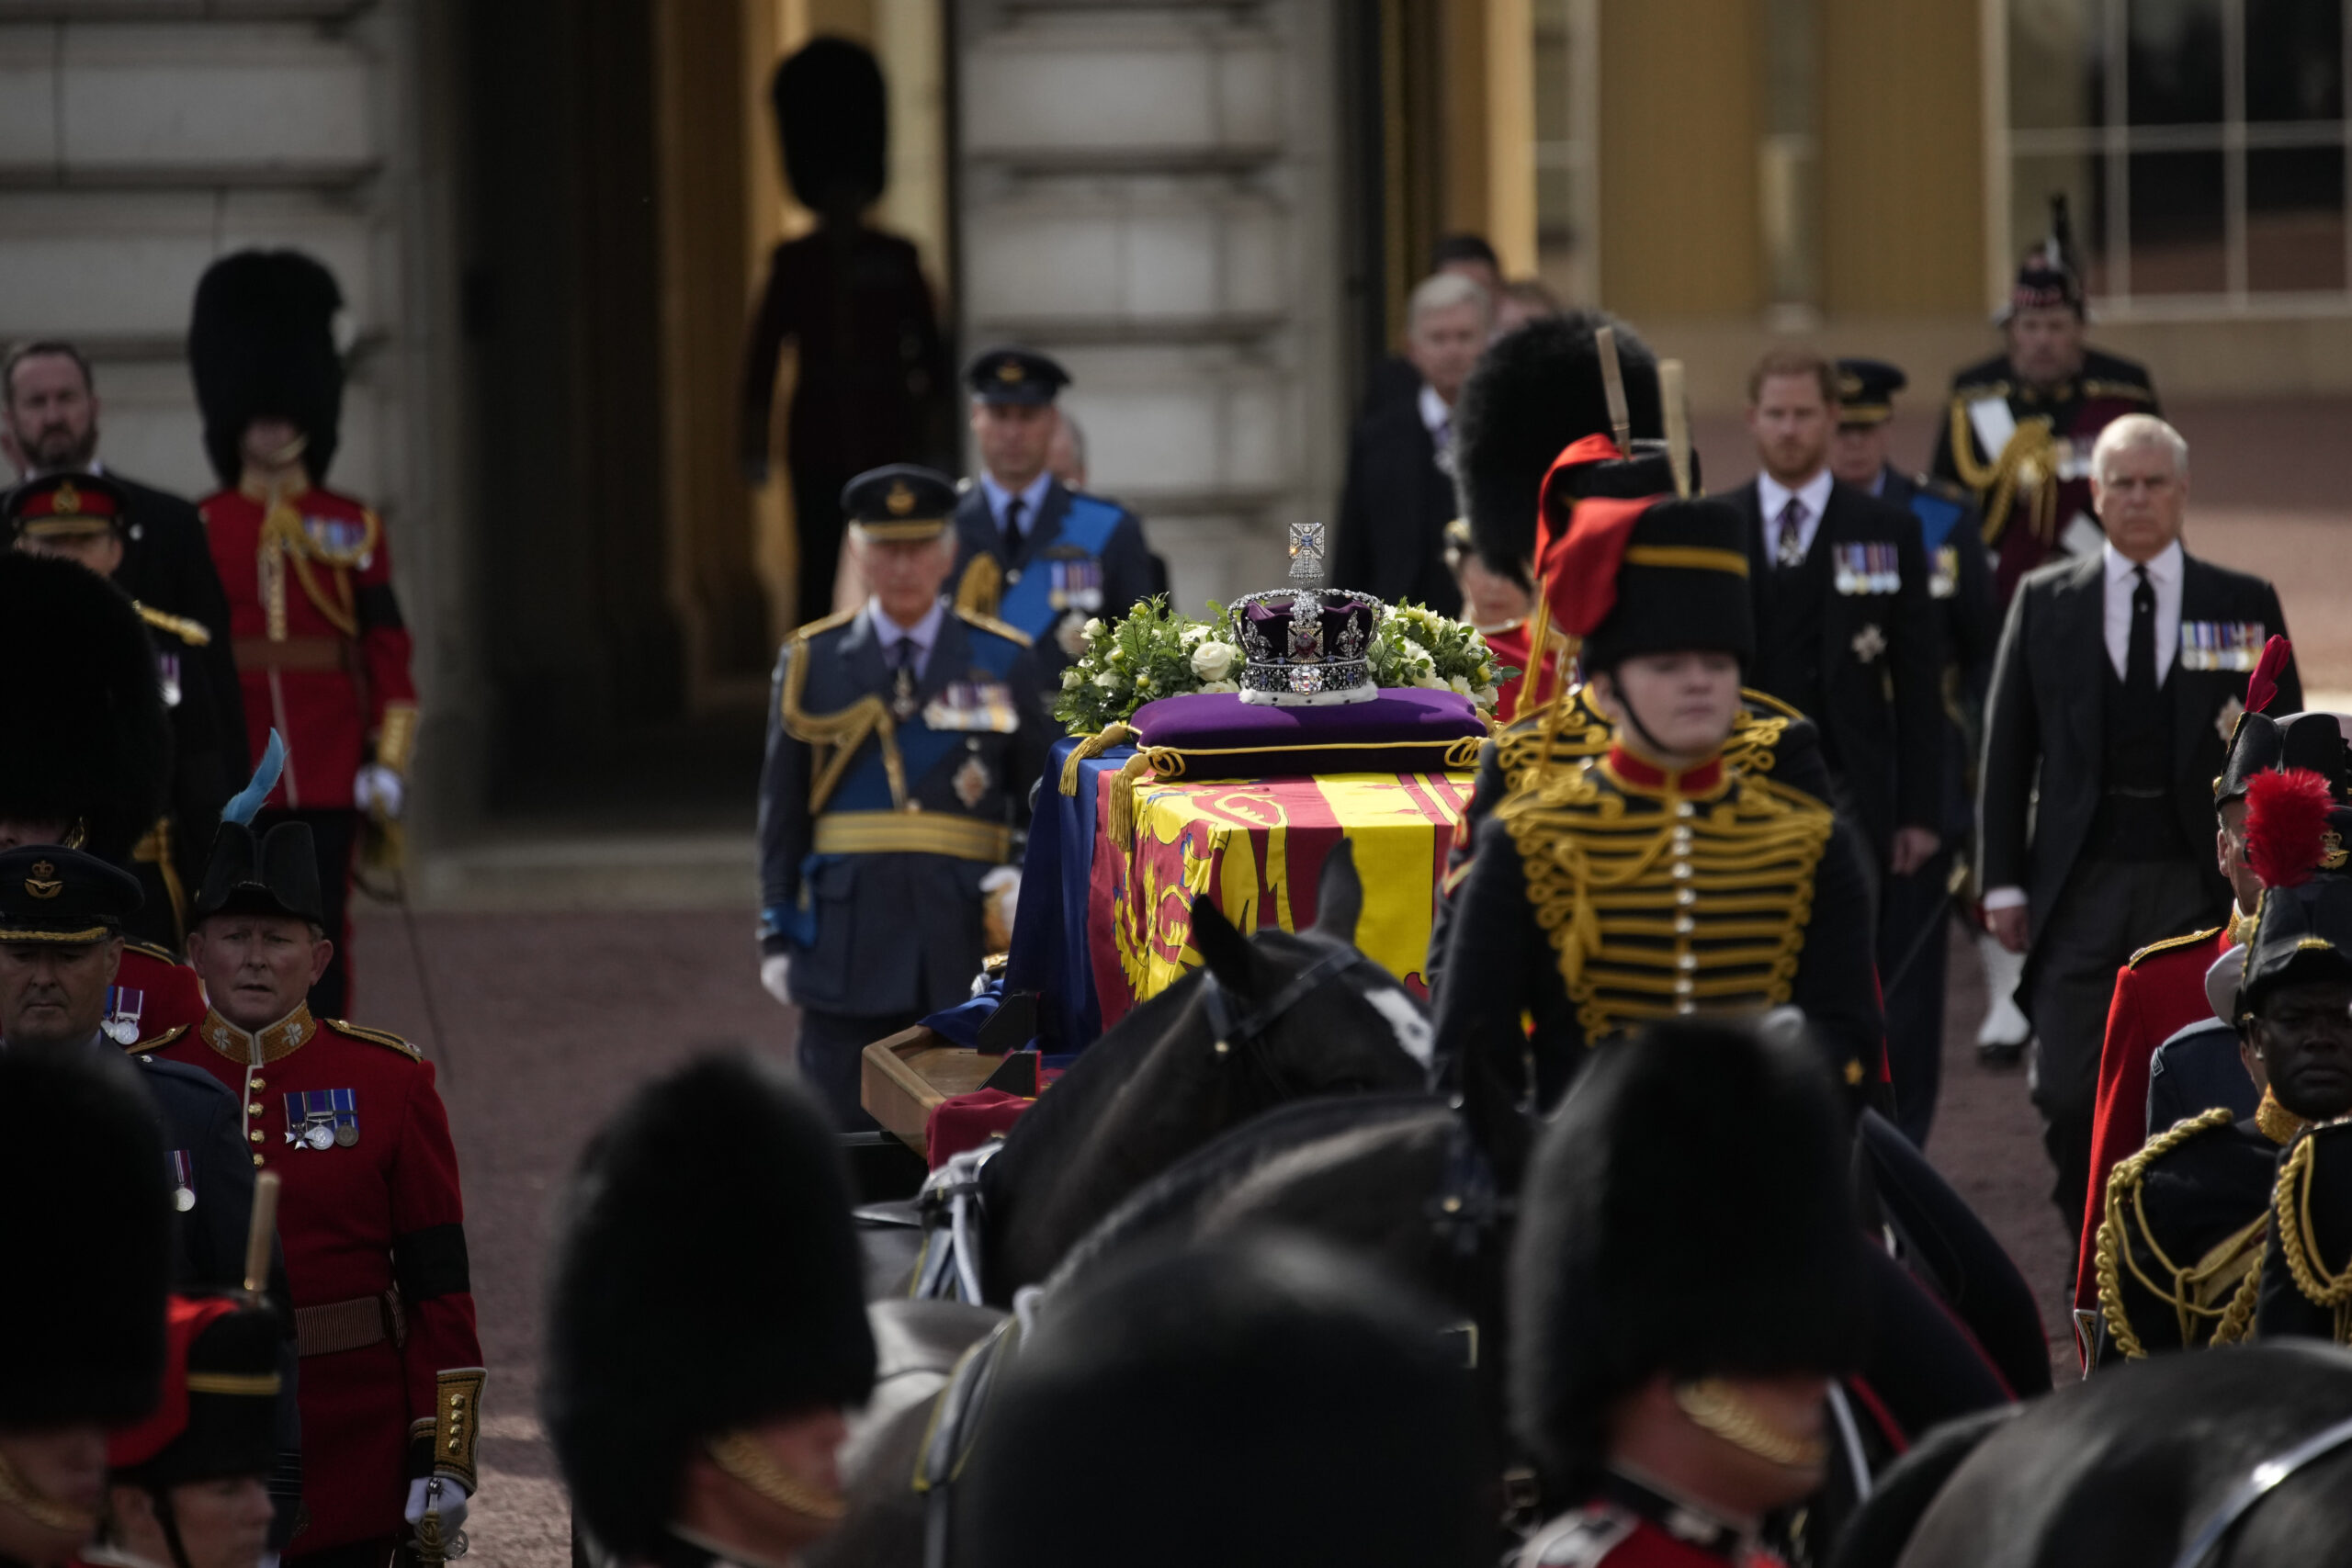 The coffin of Queen Elizabeth II leaves Buckingham Palace for Westminster Hall in London, Wednesday, Sept. 14, 2022. The Queen will lie in state in Westminster Hall for four full days before her funeral on Monday Sept. 19. (AP Photo/Christophe Ena, Pool)